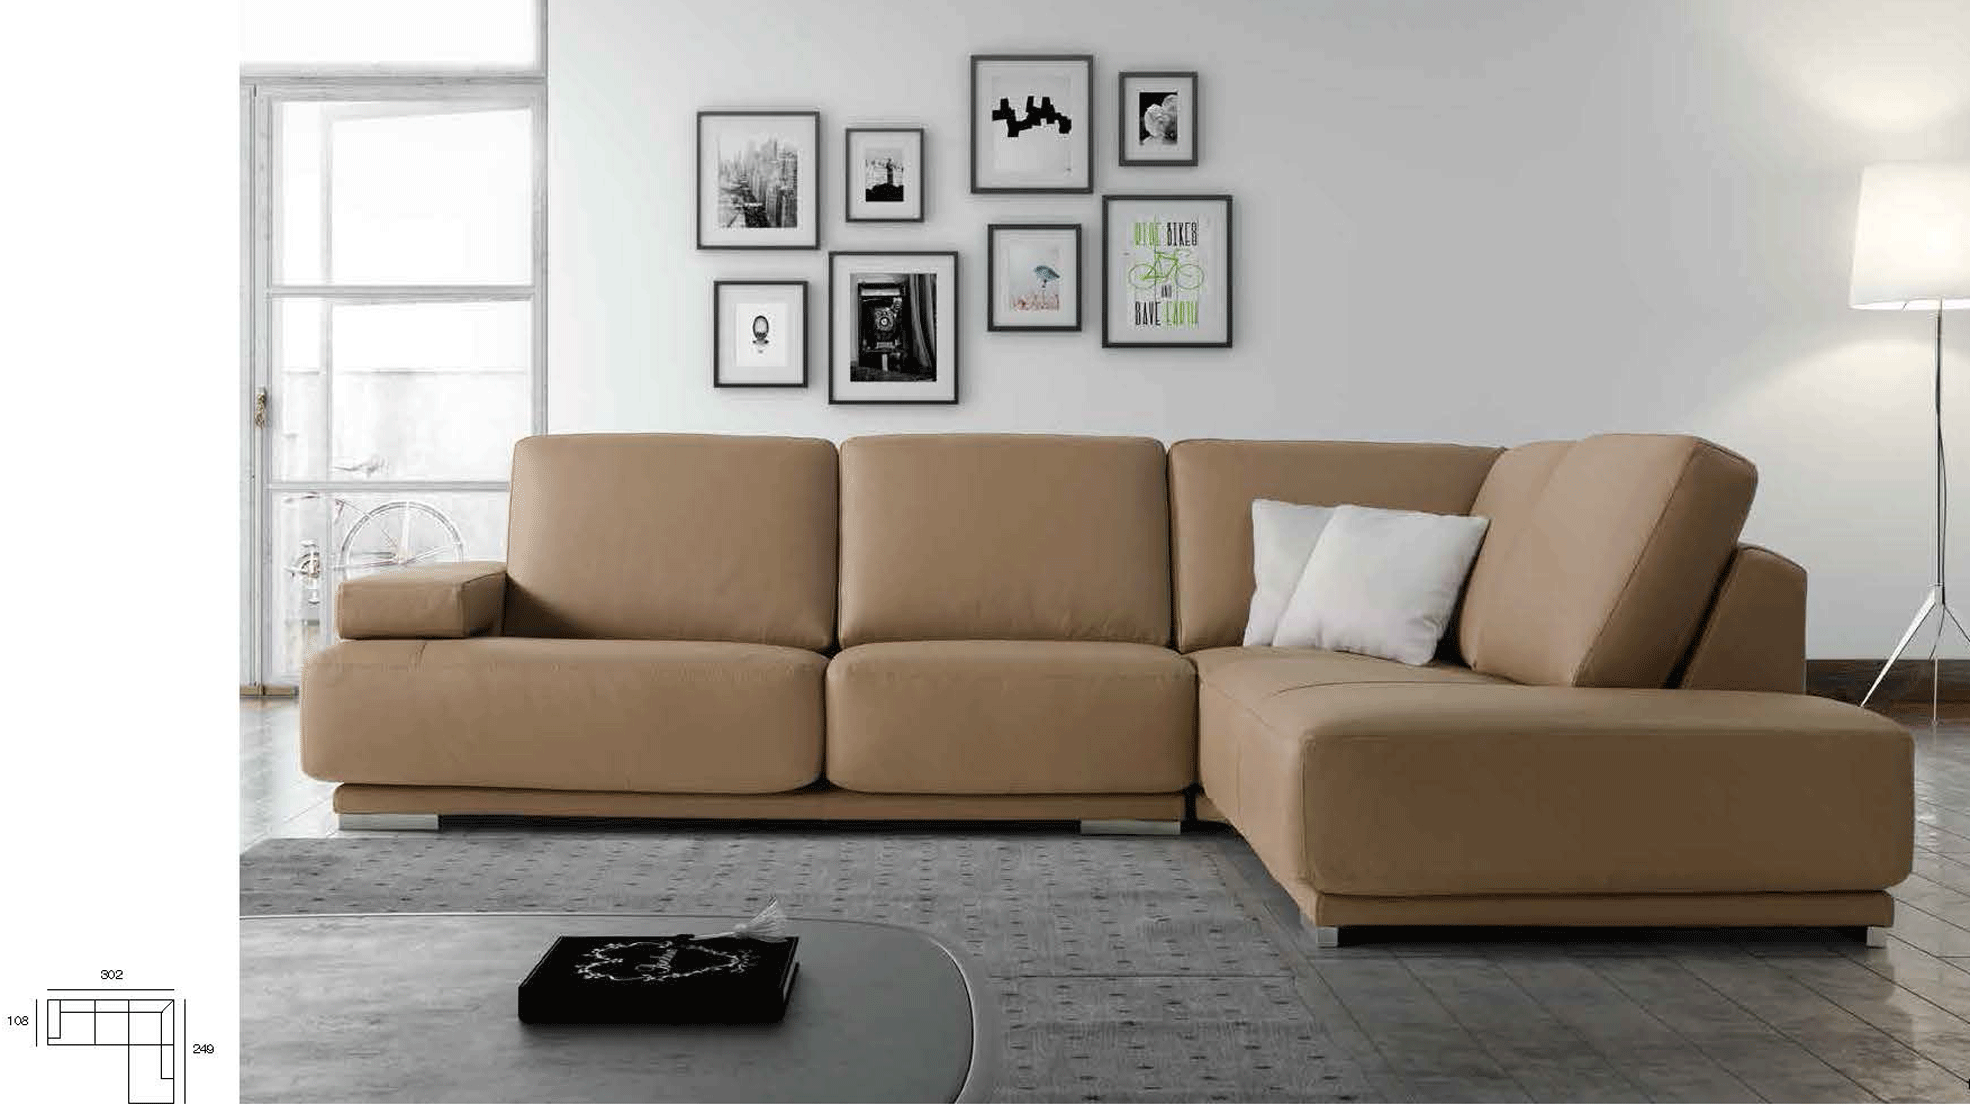 Clearance Living Room Byblos Living